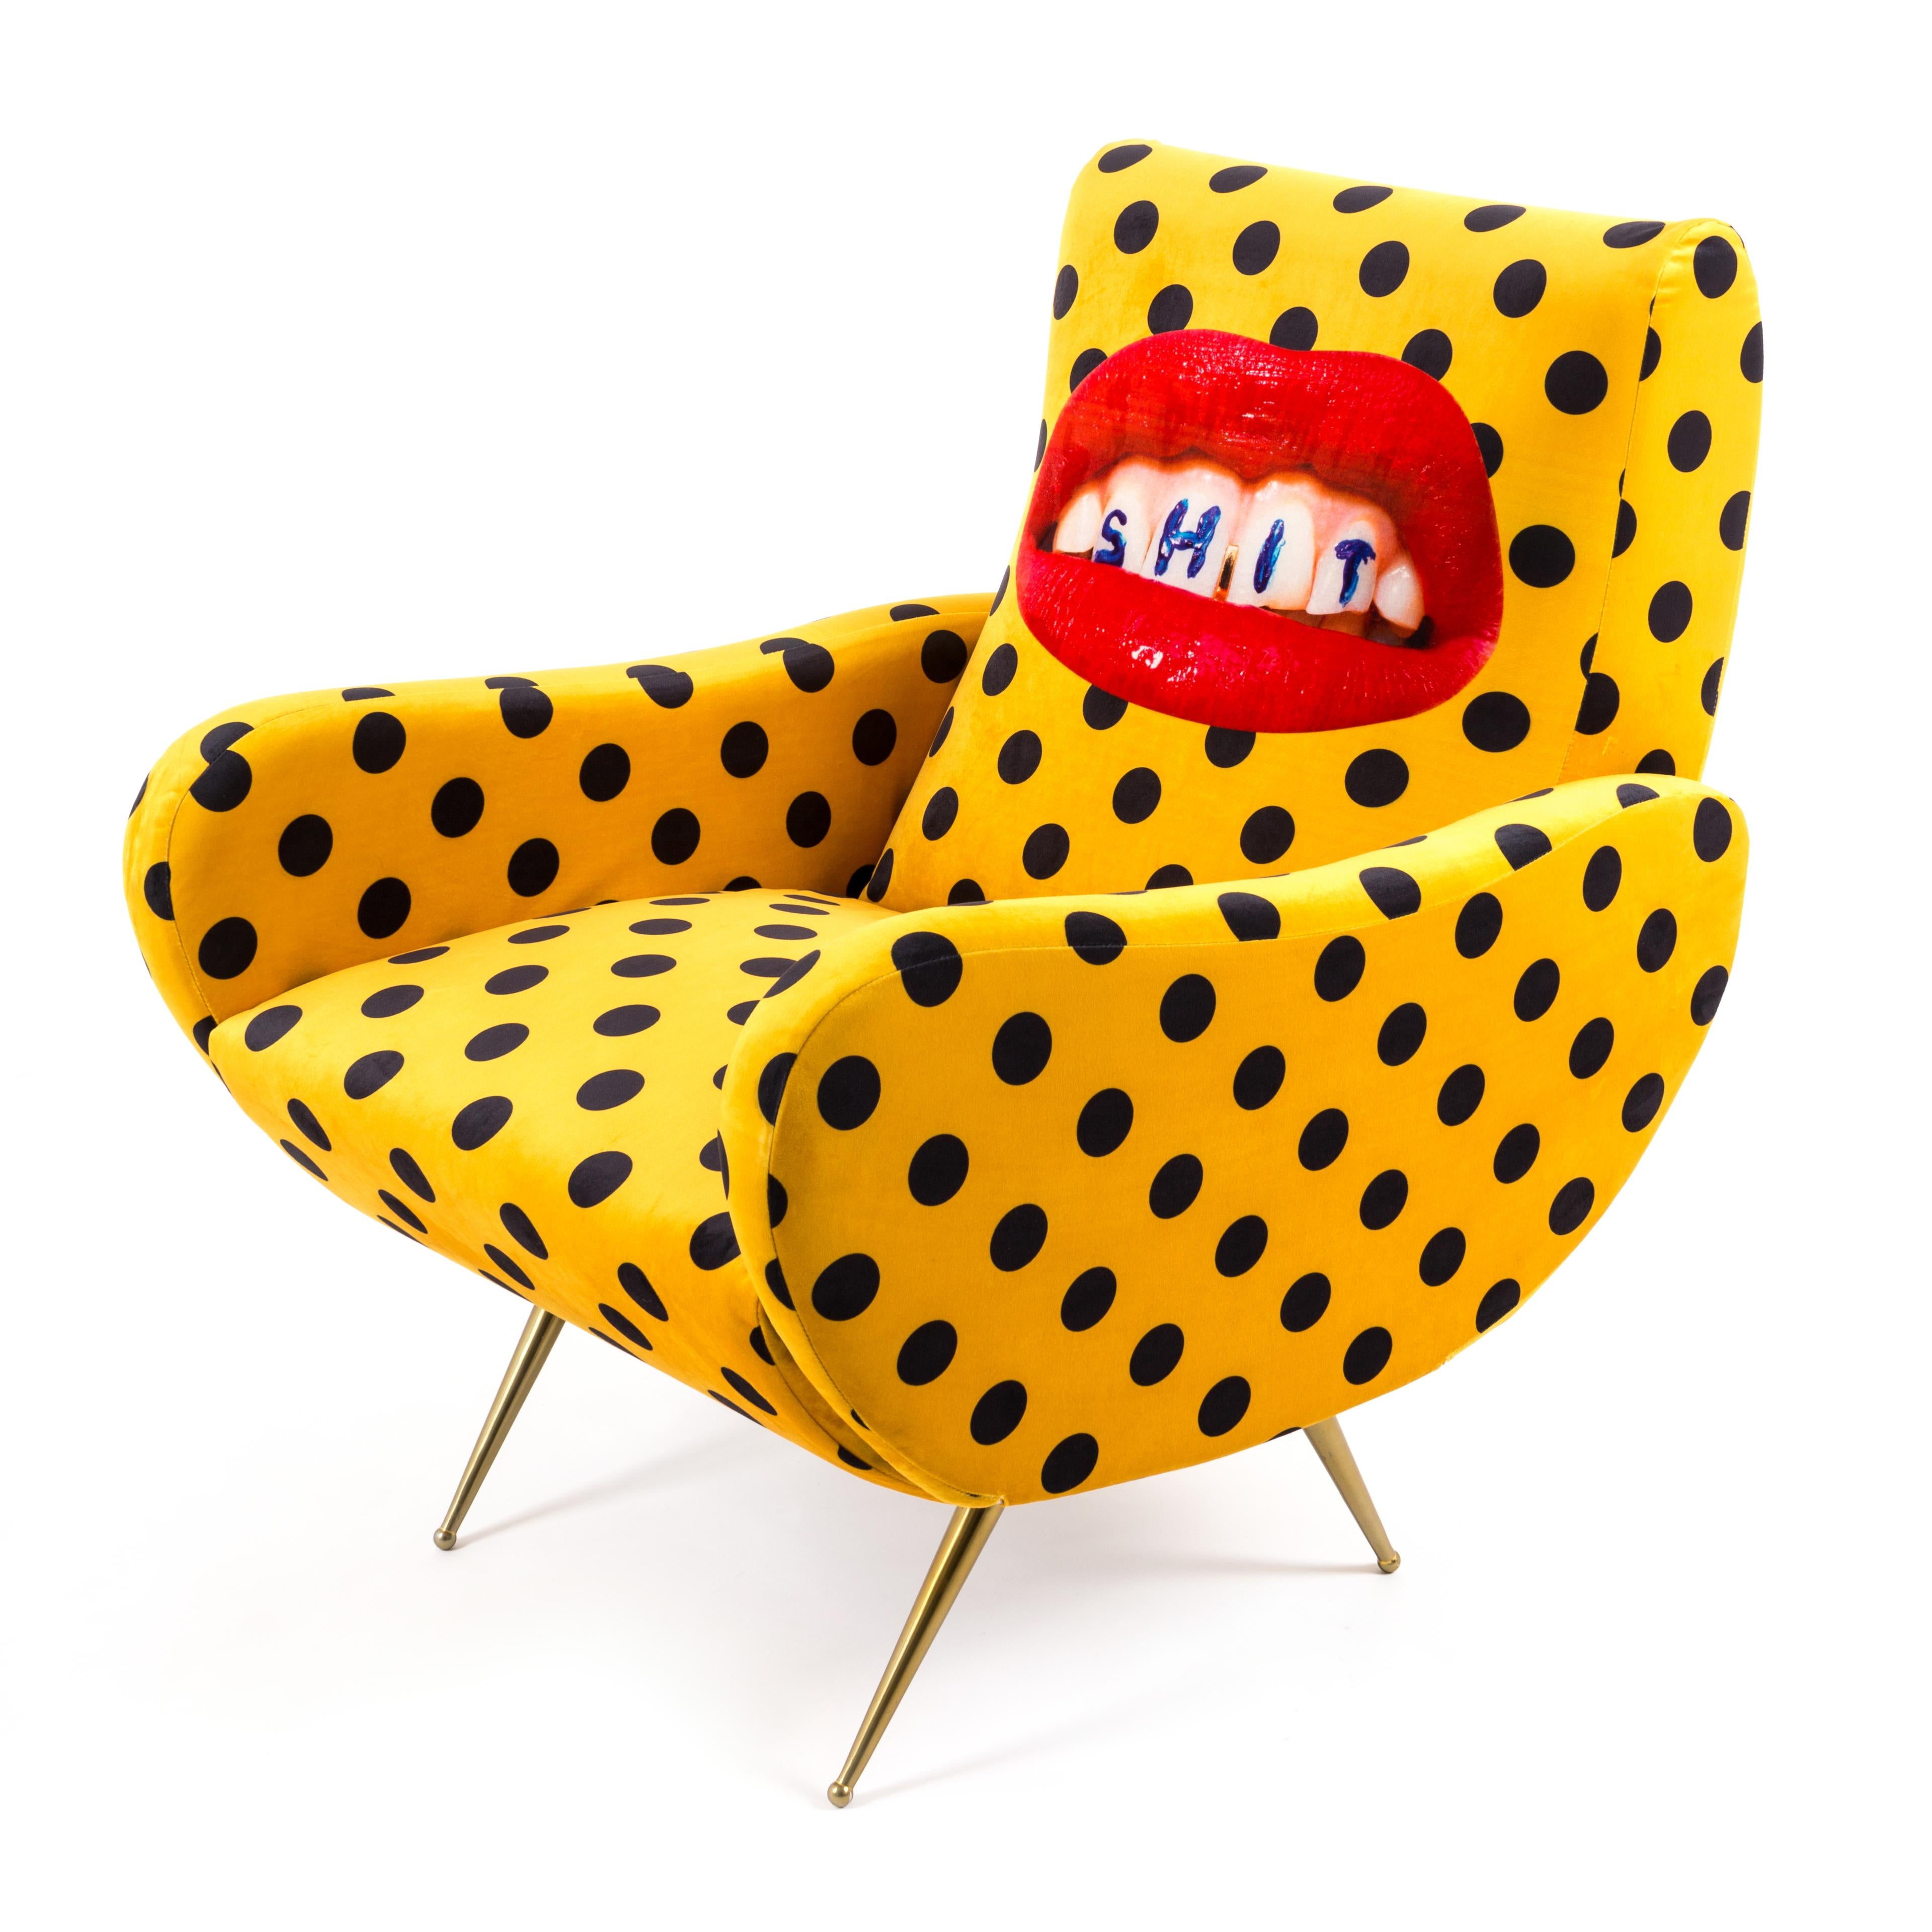 The Traditional design of these 1950s style seats are upholstered with unexpected surreal images. The images of the Toiletpaper magazine invade furniture and become comfortable objects to relax in – not only for art lovers’ homes.

- Material: